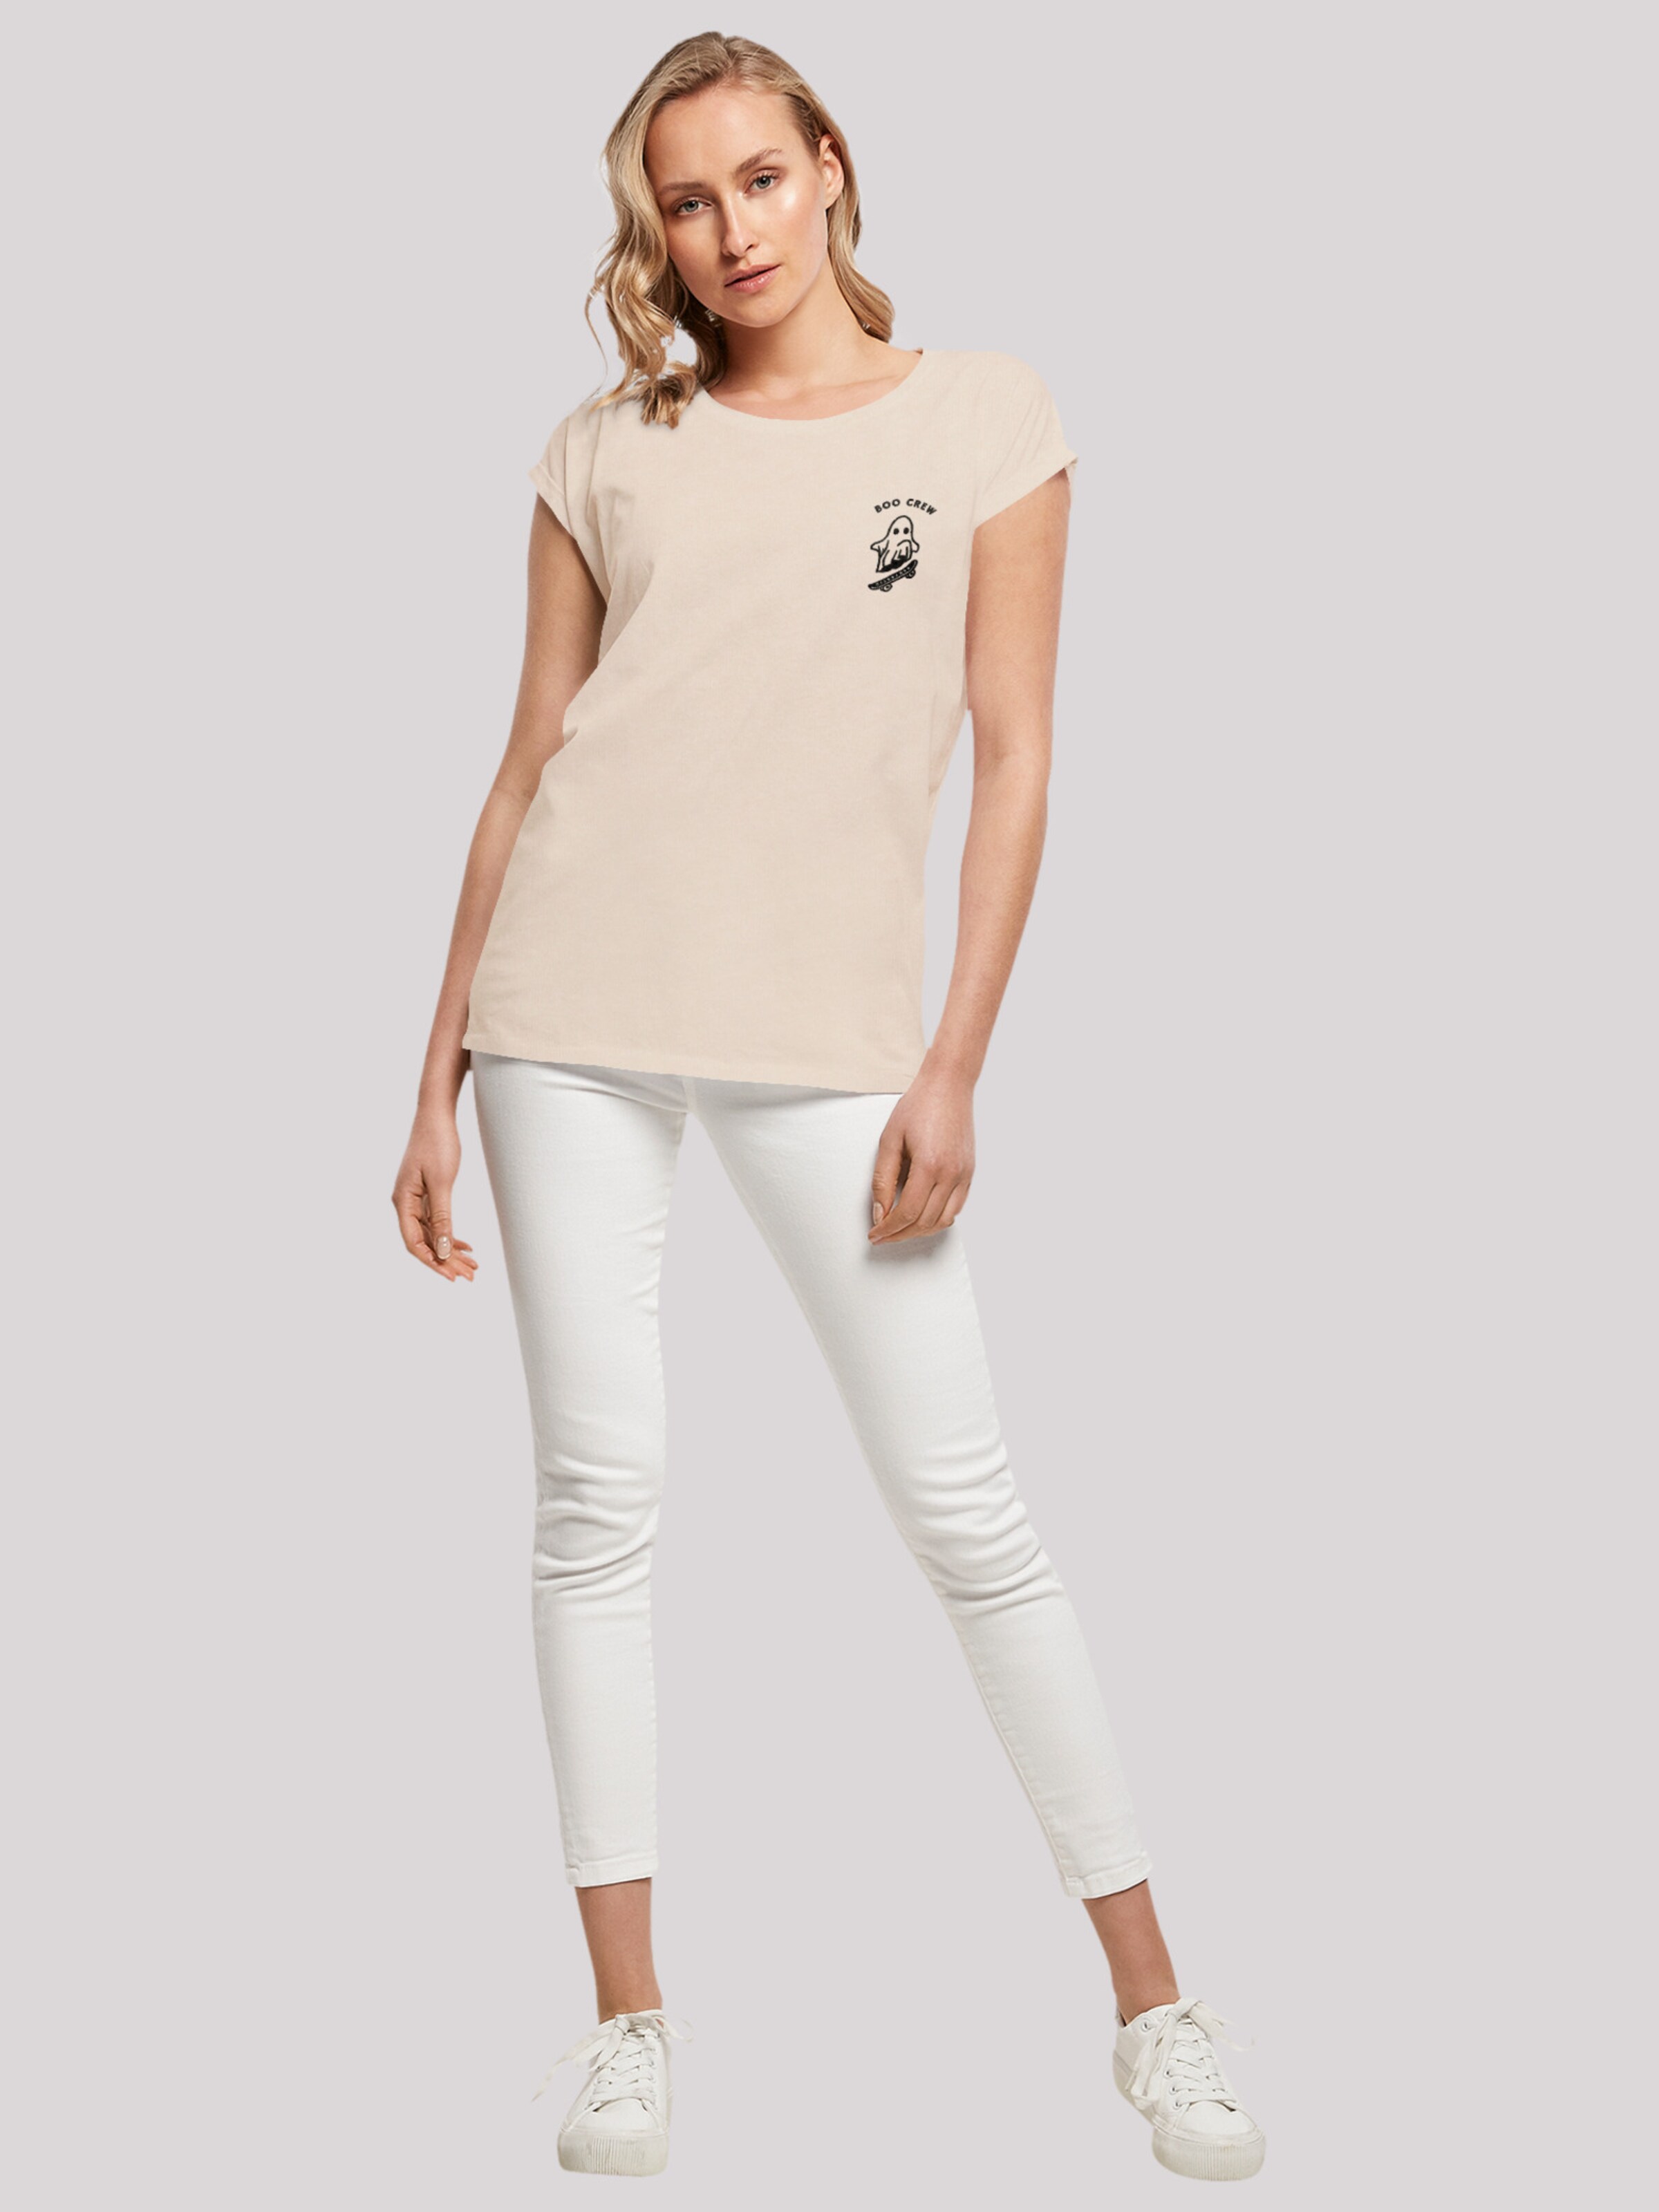 F4NT4STIC T-Shirt 'Boo Crew Halloween' in Beige | ABOUT YOU